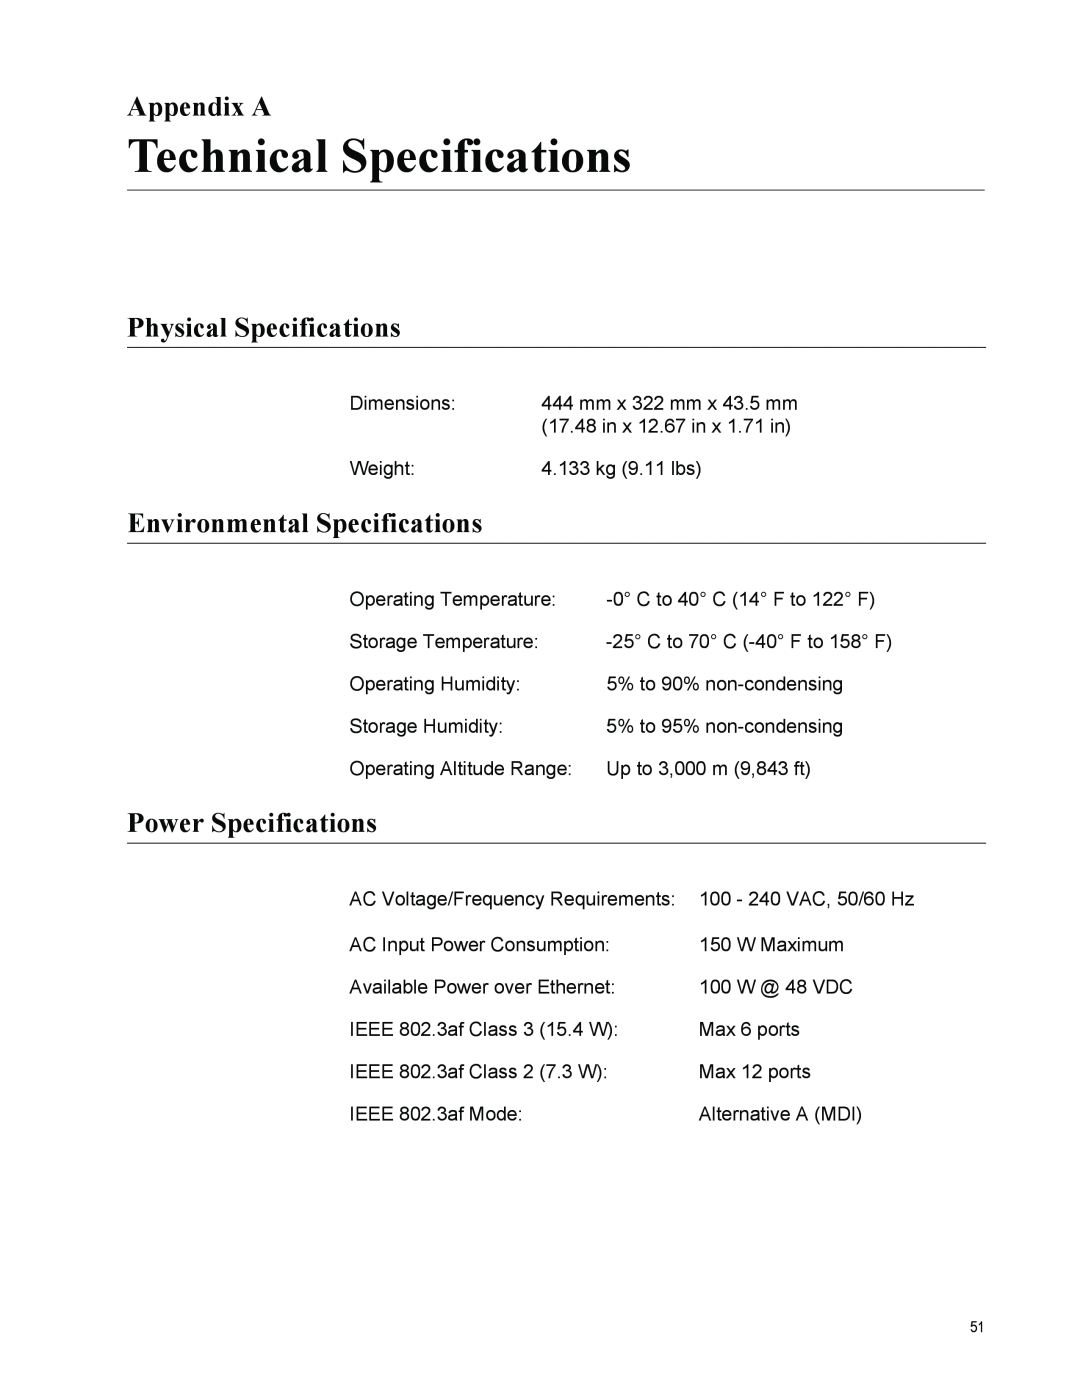 Allied Telesis AT-FS750/24POE Technical Specifications, Appendix A, Physical Specifications, Environmental Specifications 